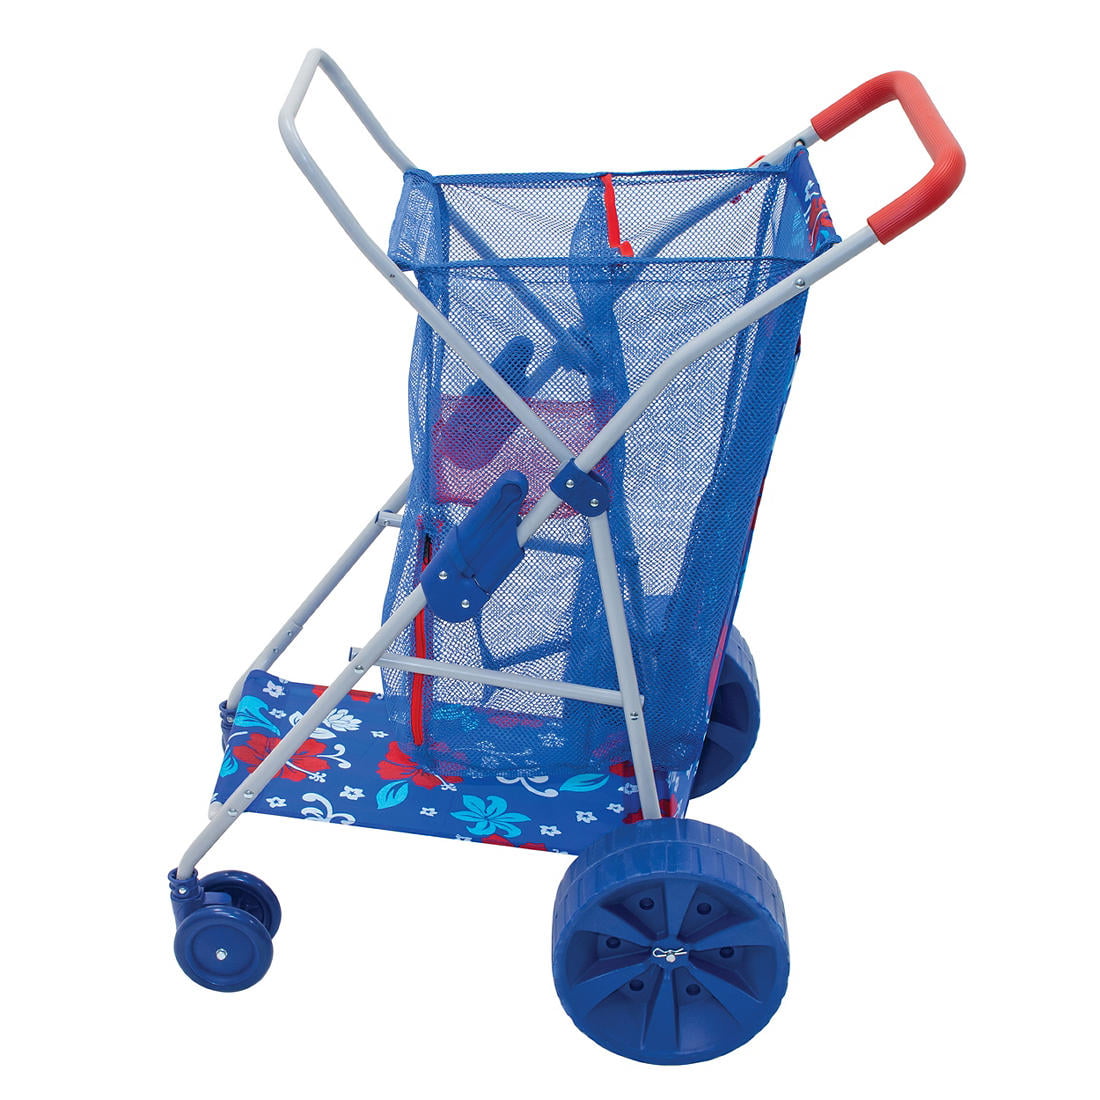 Blue with Red Accent Print New 2020 Design Hawaiian Print Lighter Weight Than Prior Versions Rio Wonder Wheeler Folding Beach Cart Holds 4 Beach Chairs 